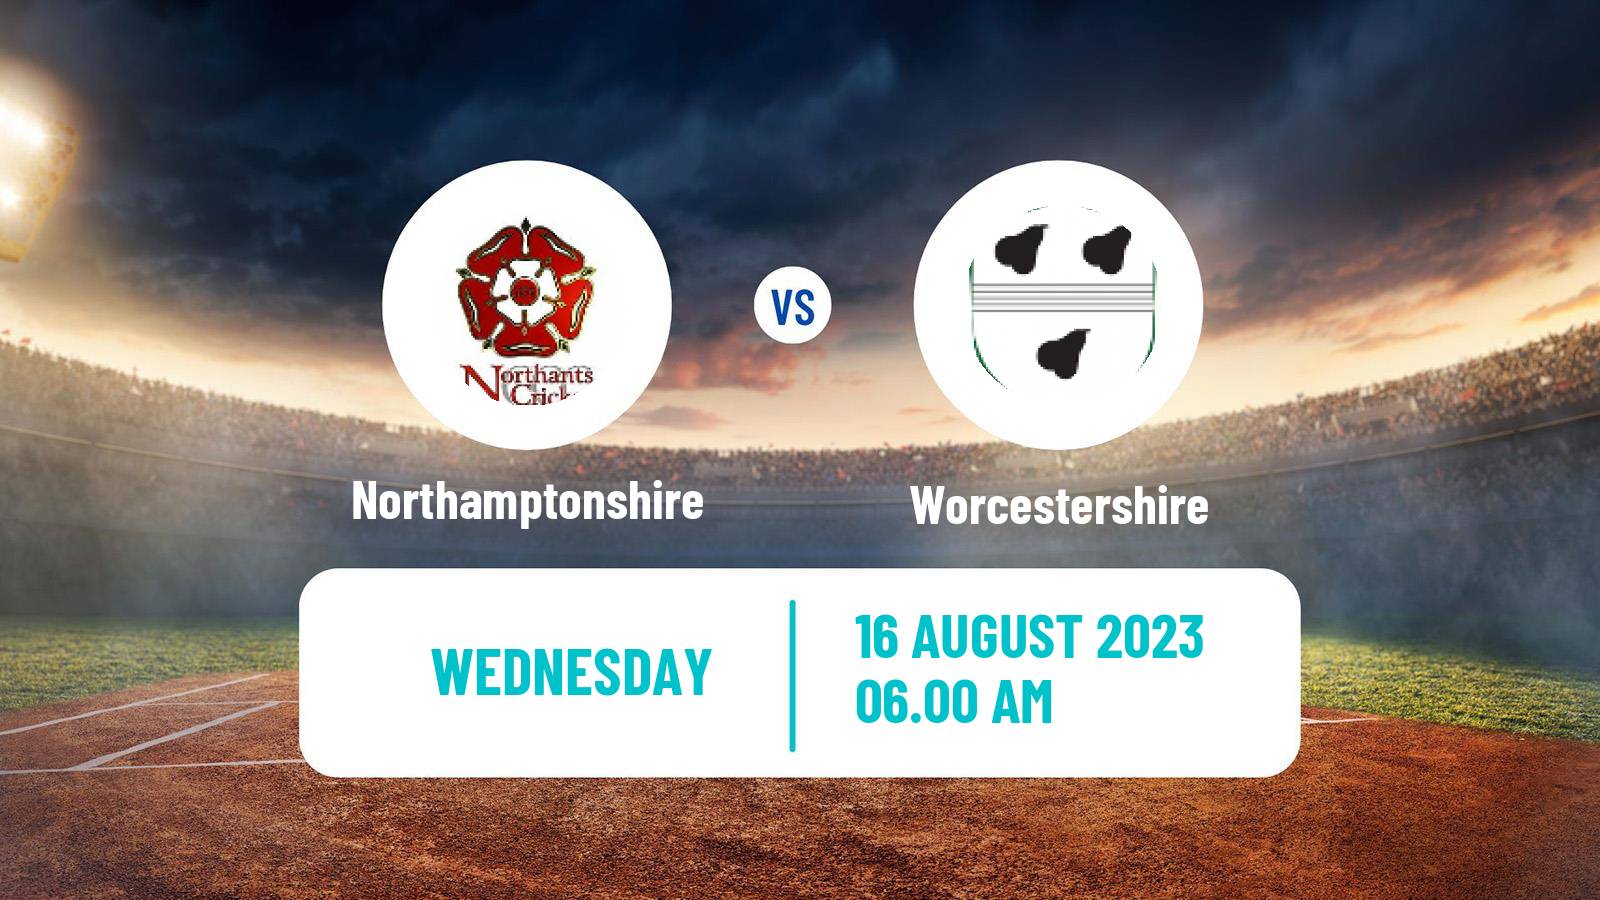 Cricket Royal London One-Day Cup Northamptonshire - Worcestershire